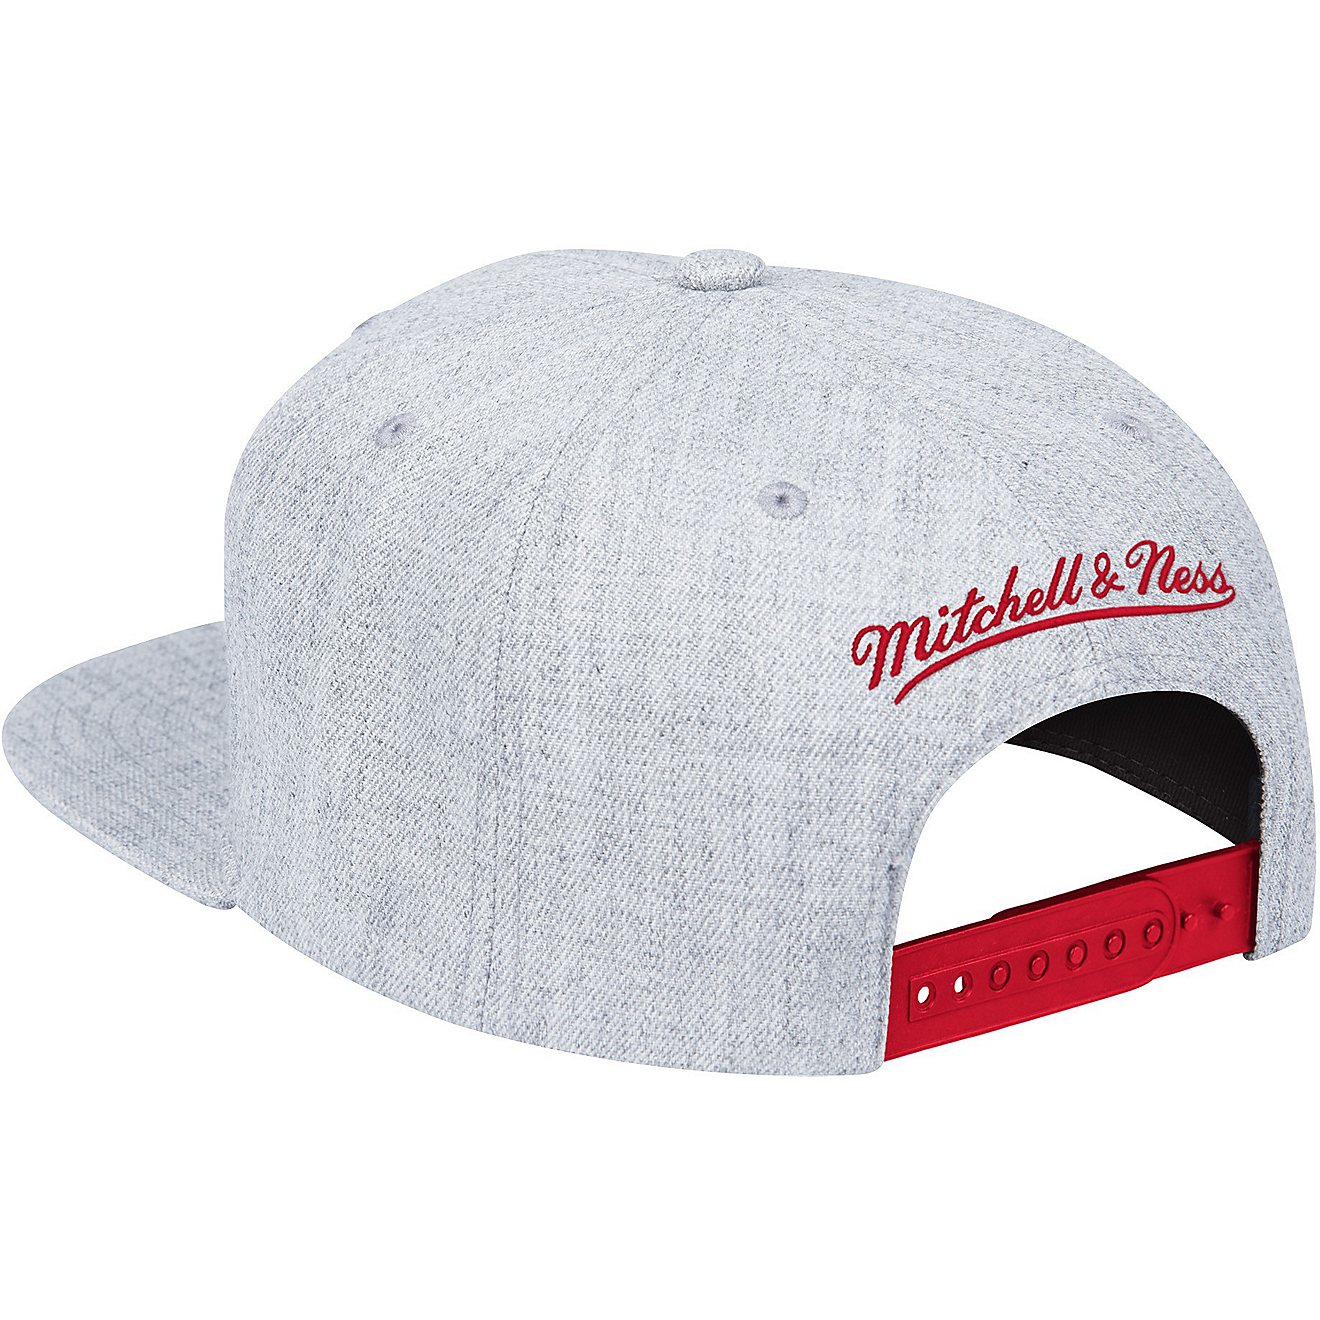 Mitchell & Ness Houston Rockets Team Heather Snapback Cap                                                                        - view number 2